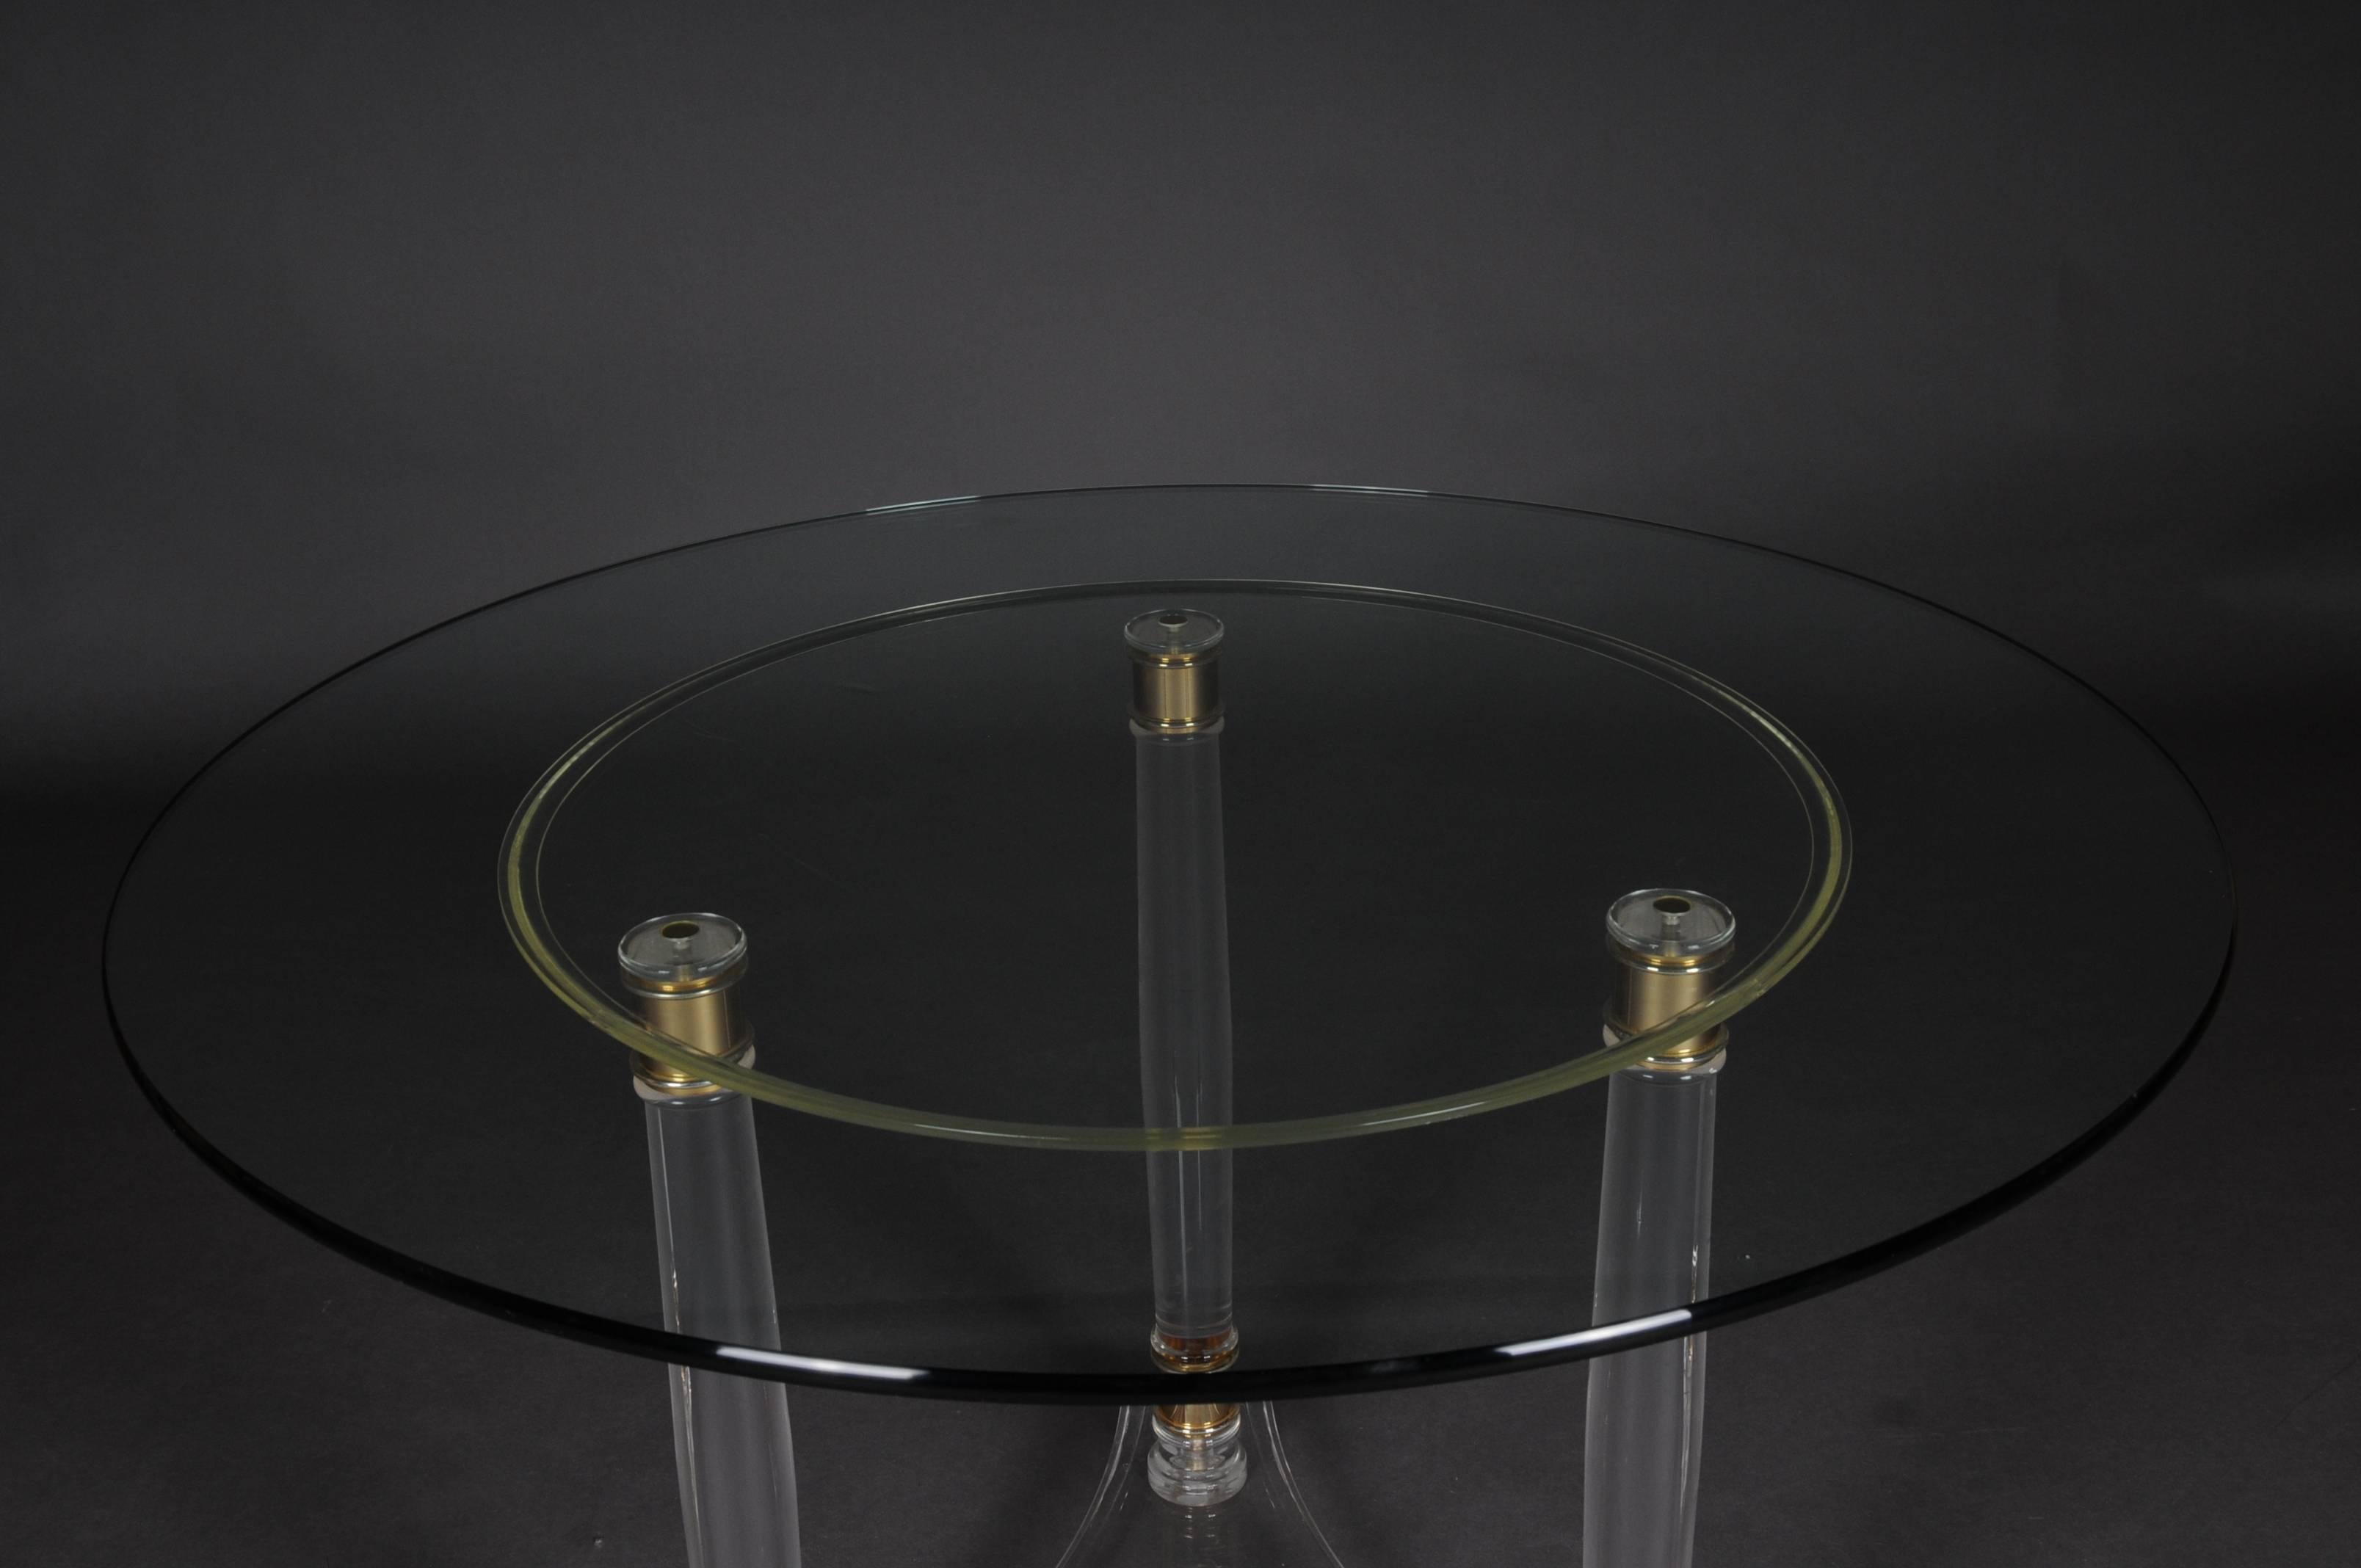 Large, Round Designer Acrylic Table with Brass In Good Condition For Sale In Berlin, DE